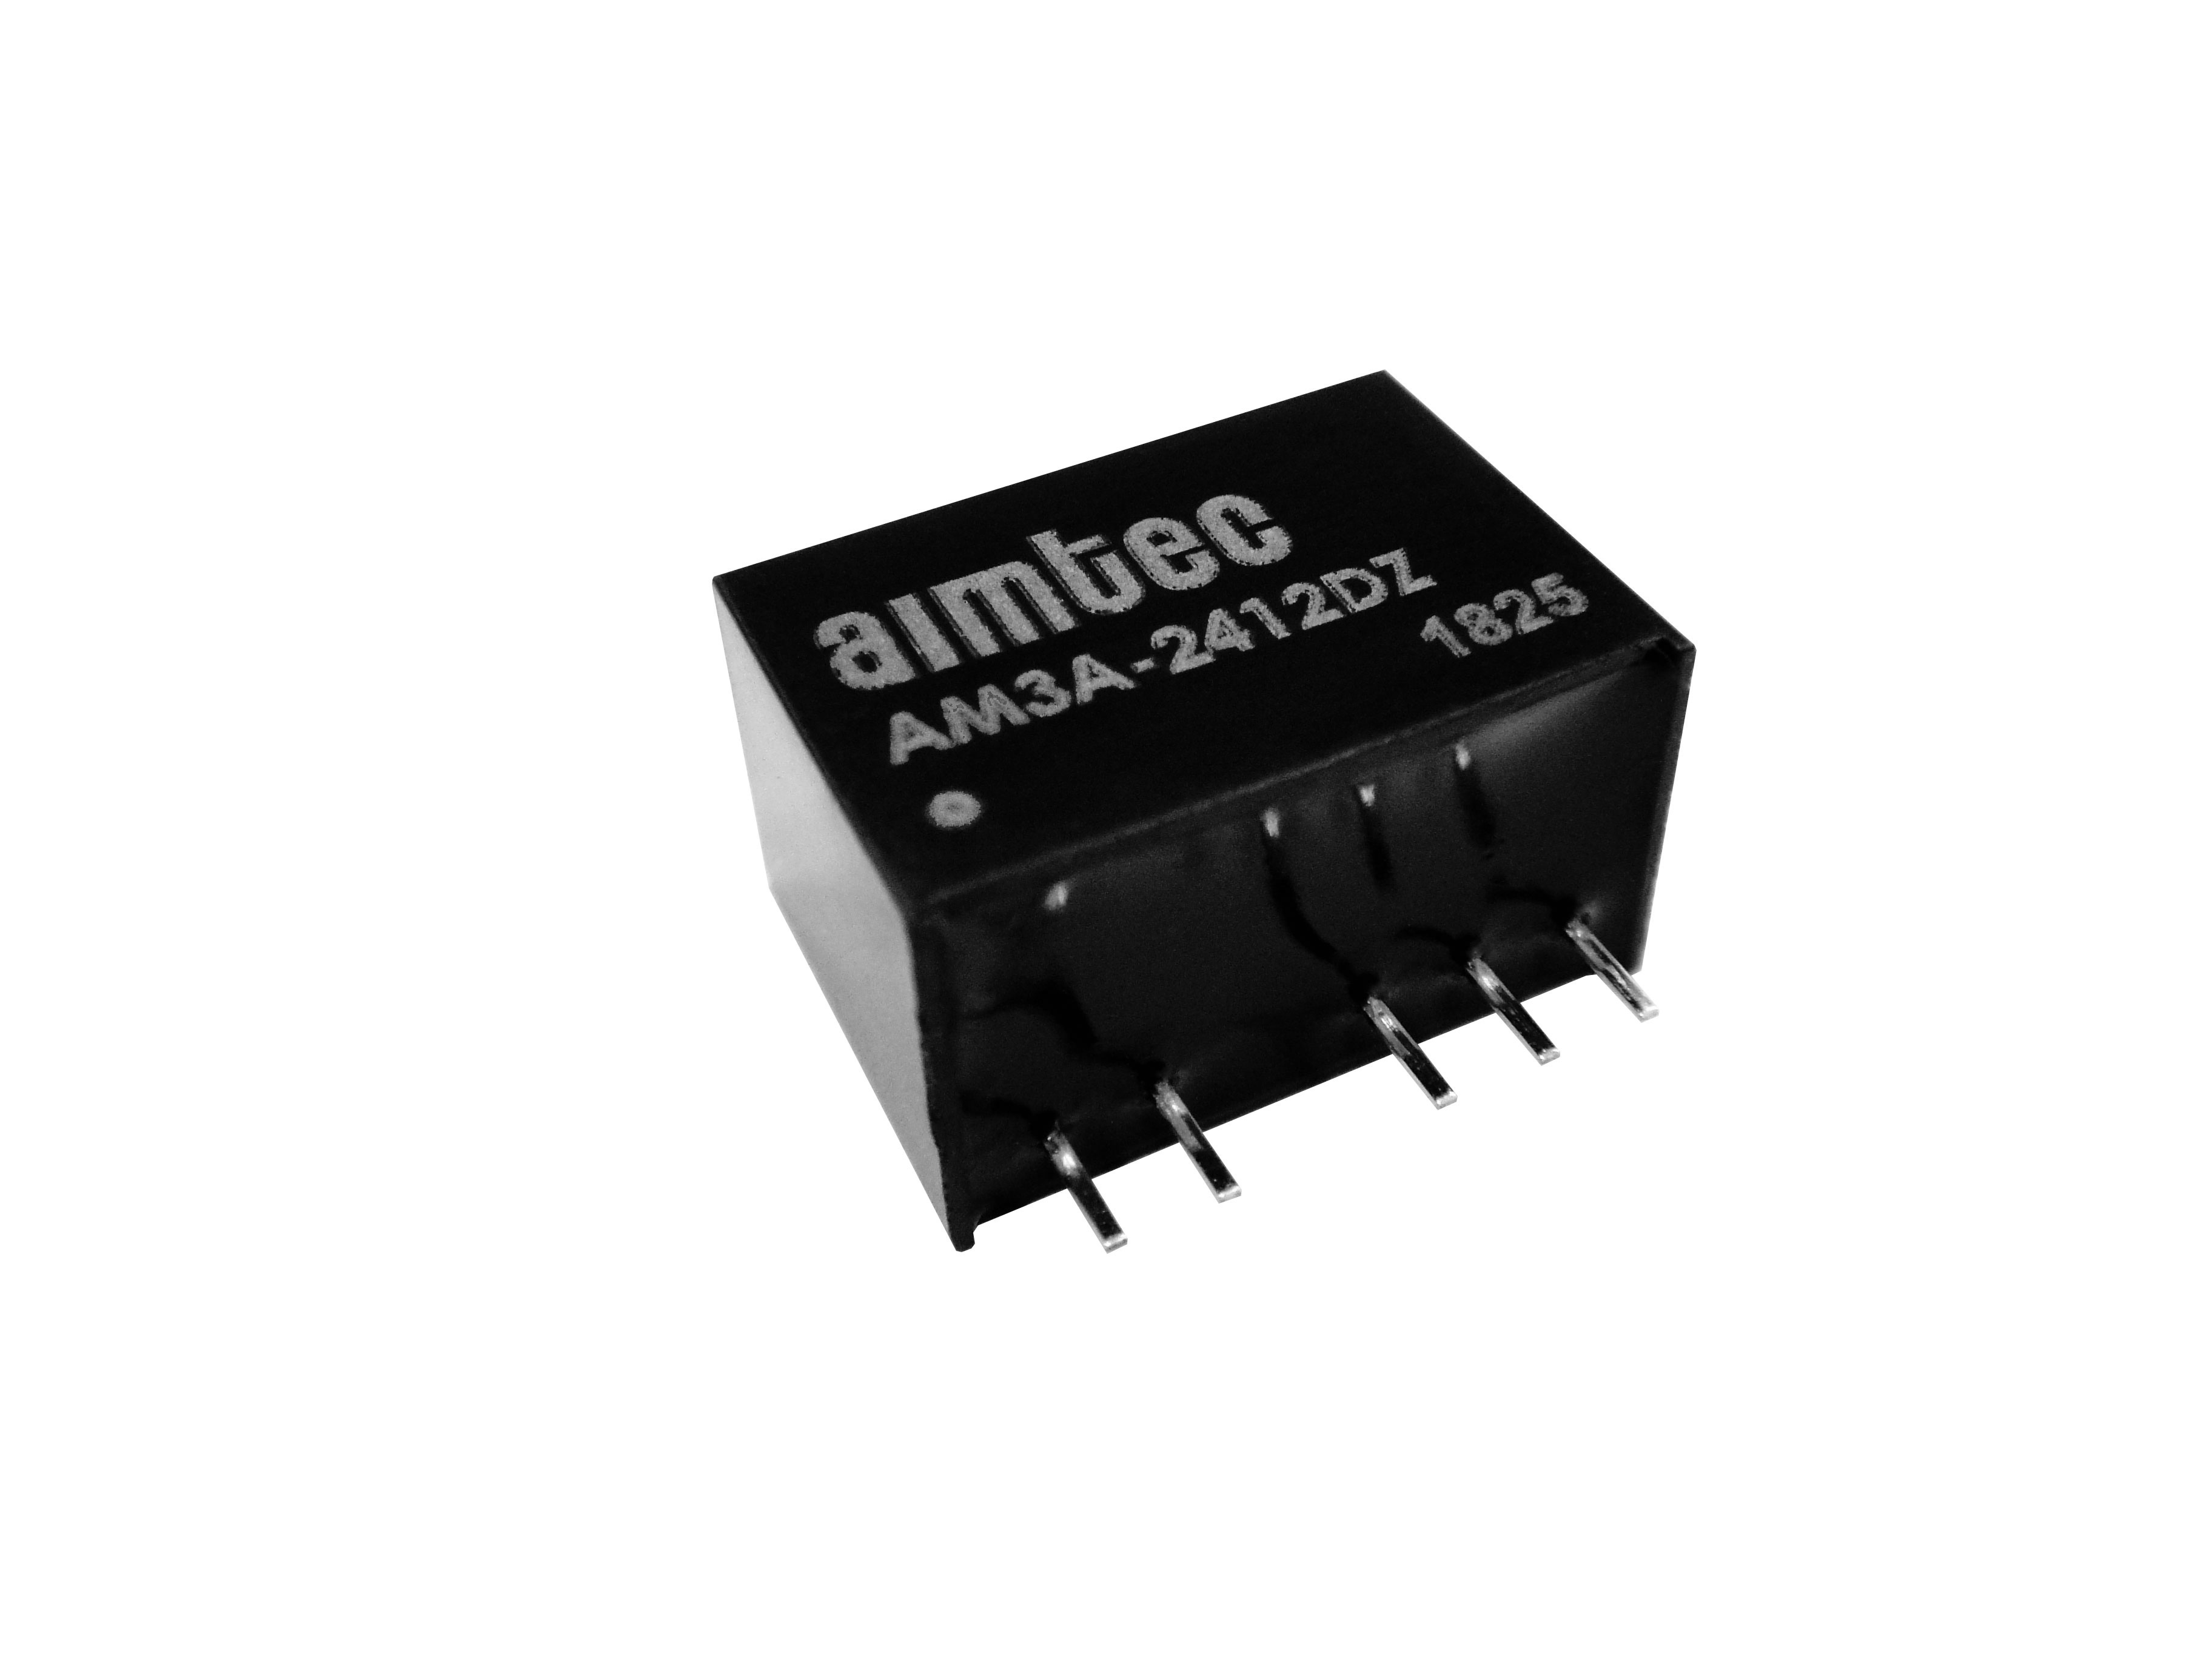 Aimtec Launches the First Ever 3-Watt Dual Output SIP6 DC/DC Converter!